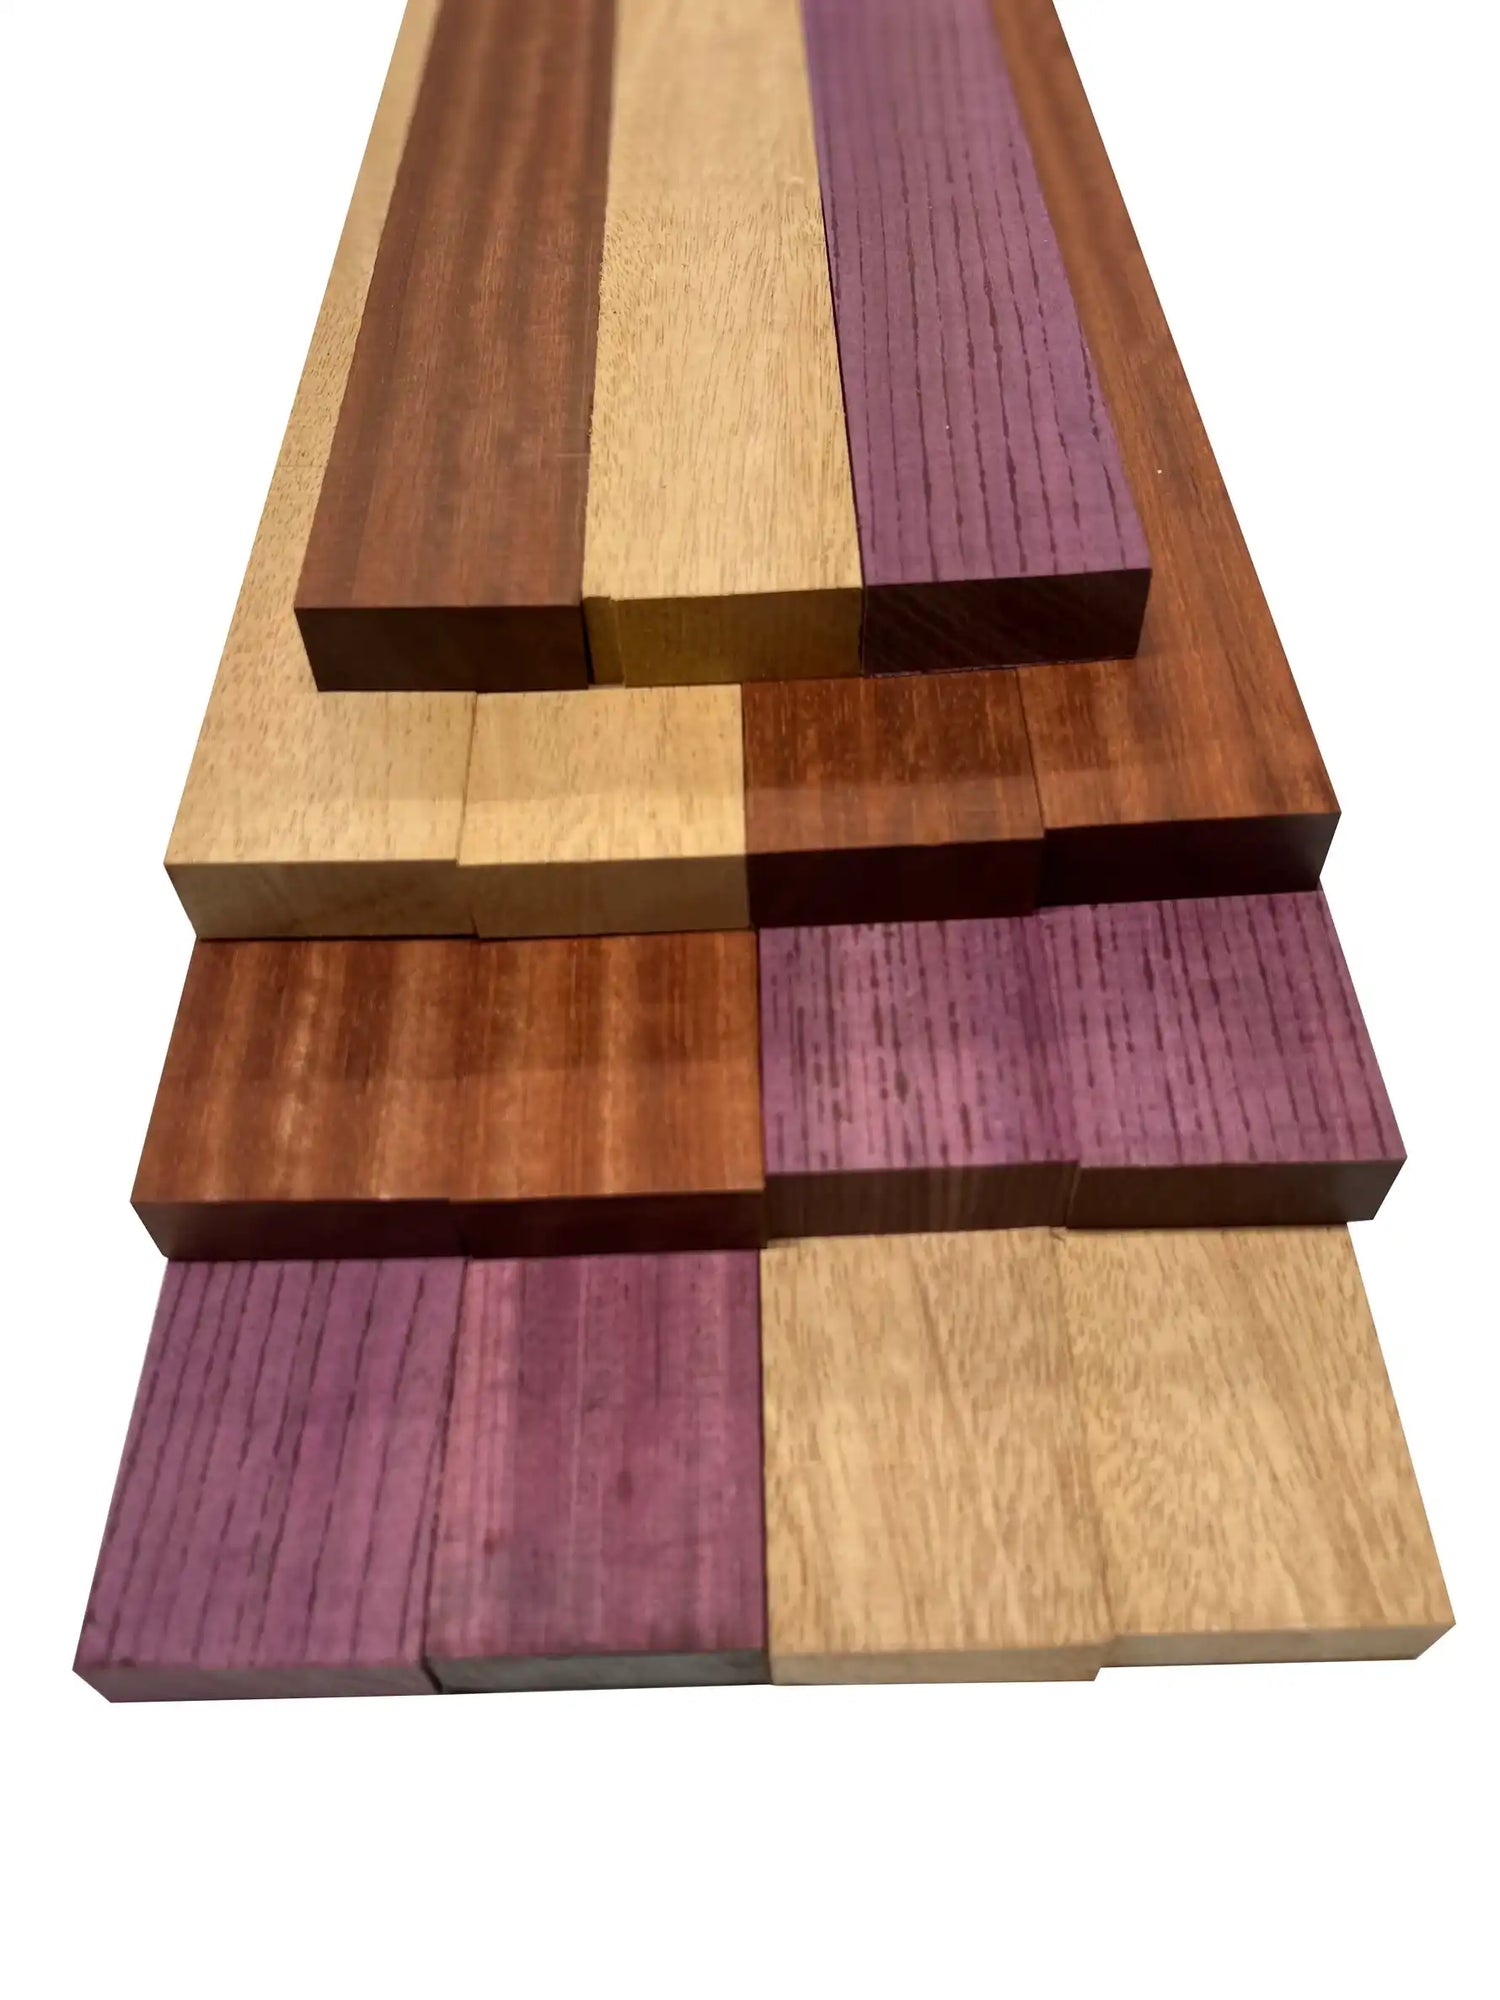 Combo of 15 , 3/4&quot; Lumber Boards | Cutting Board Blocks | Purpleheart, African Mahogany, Bloodwood - Exotic Wood Zone - Buy online Across USA 